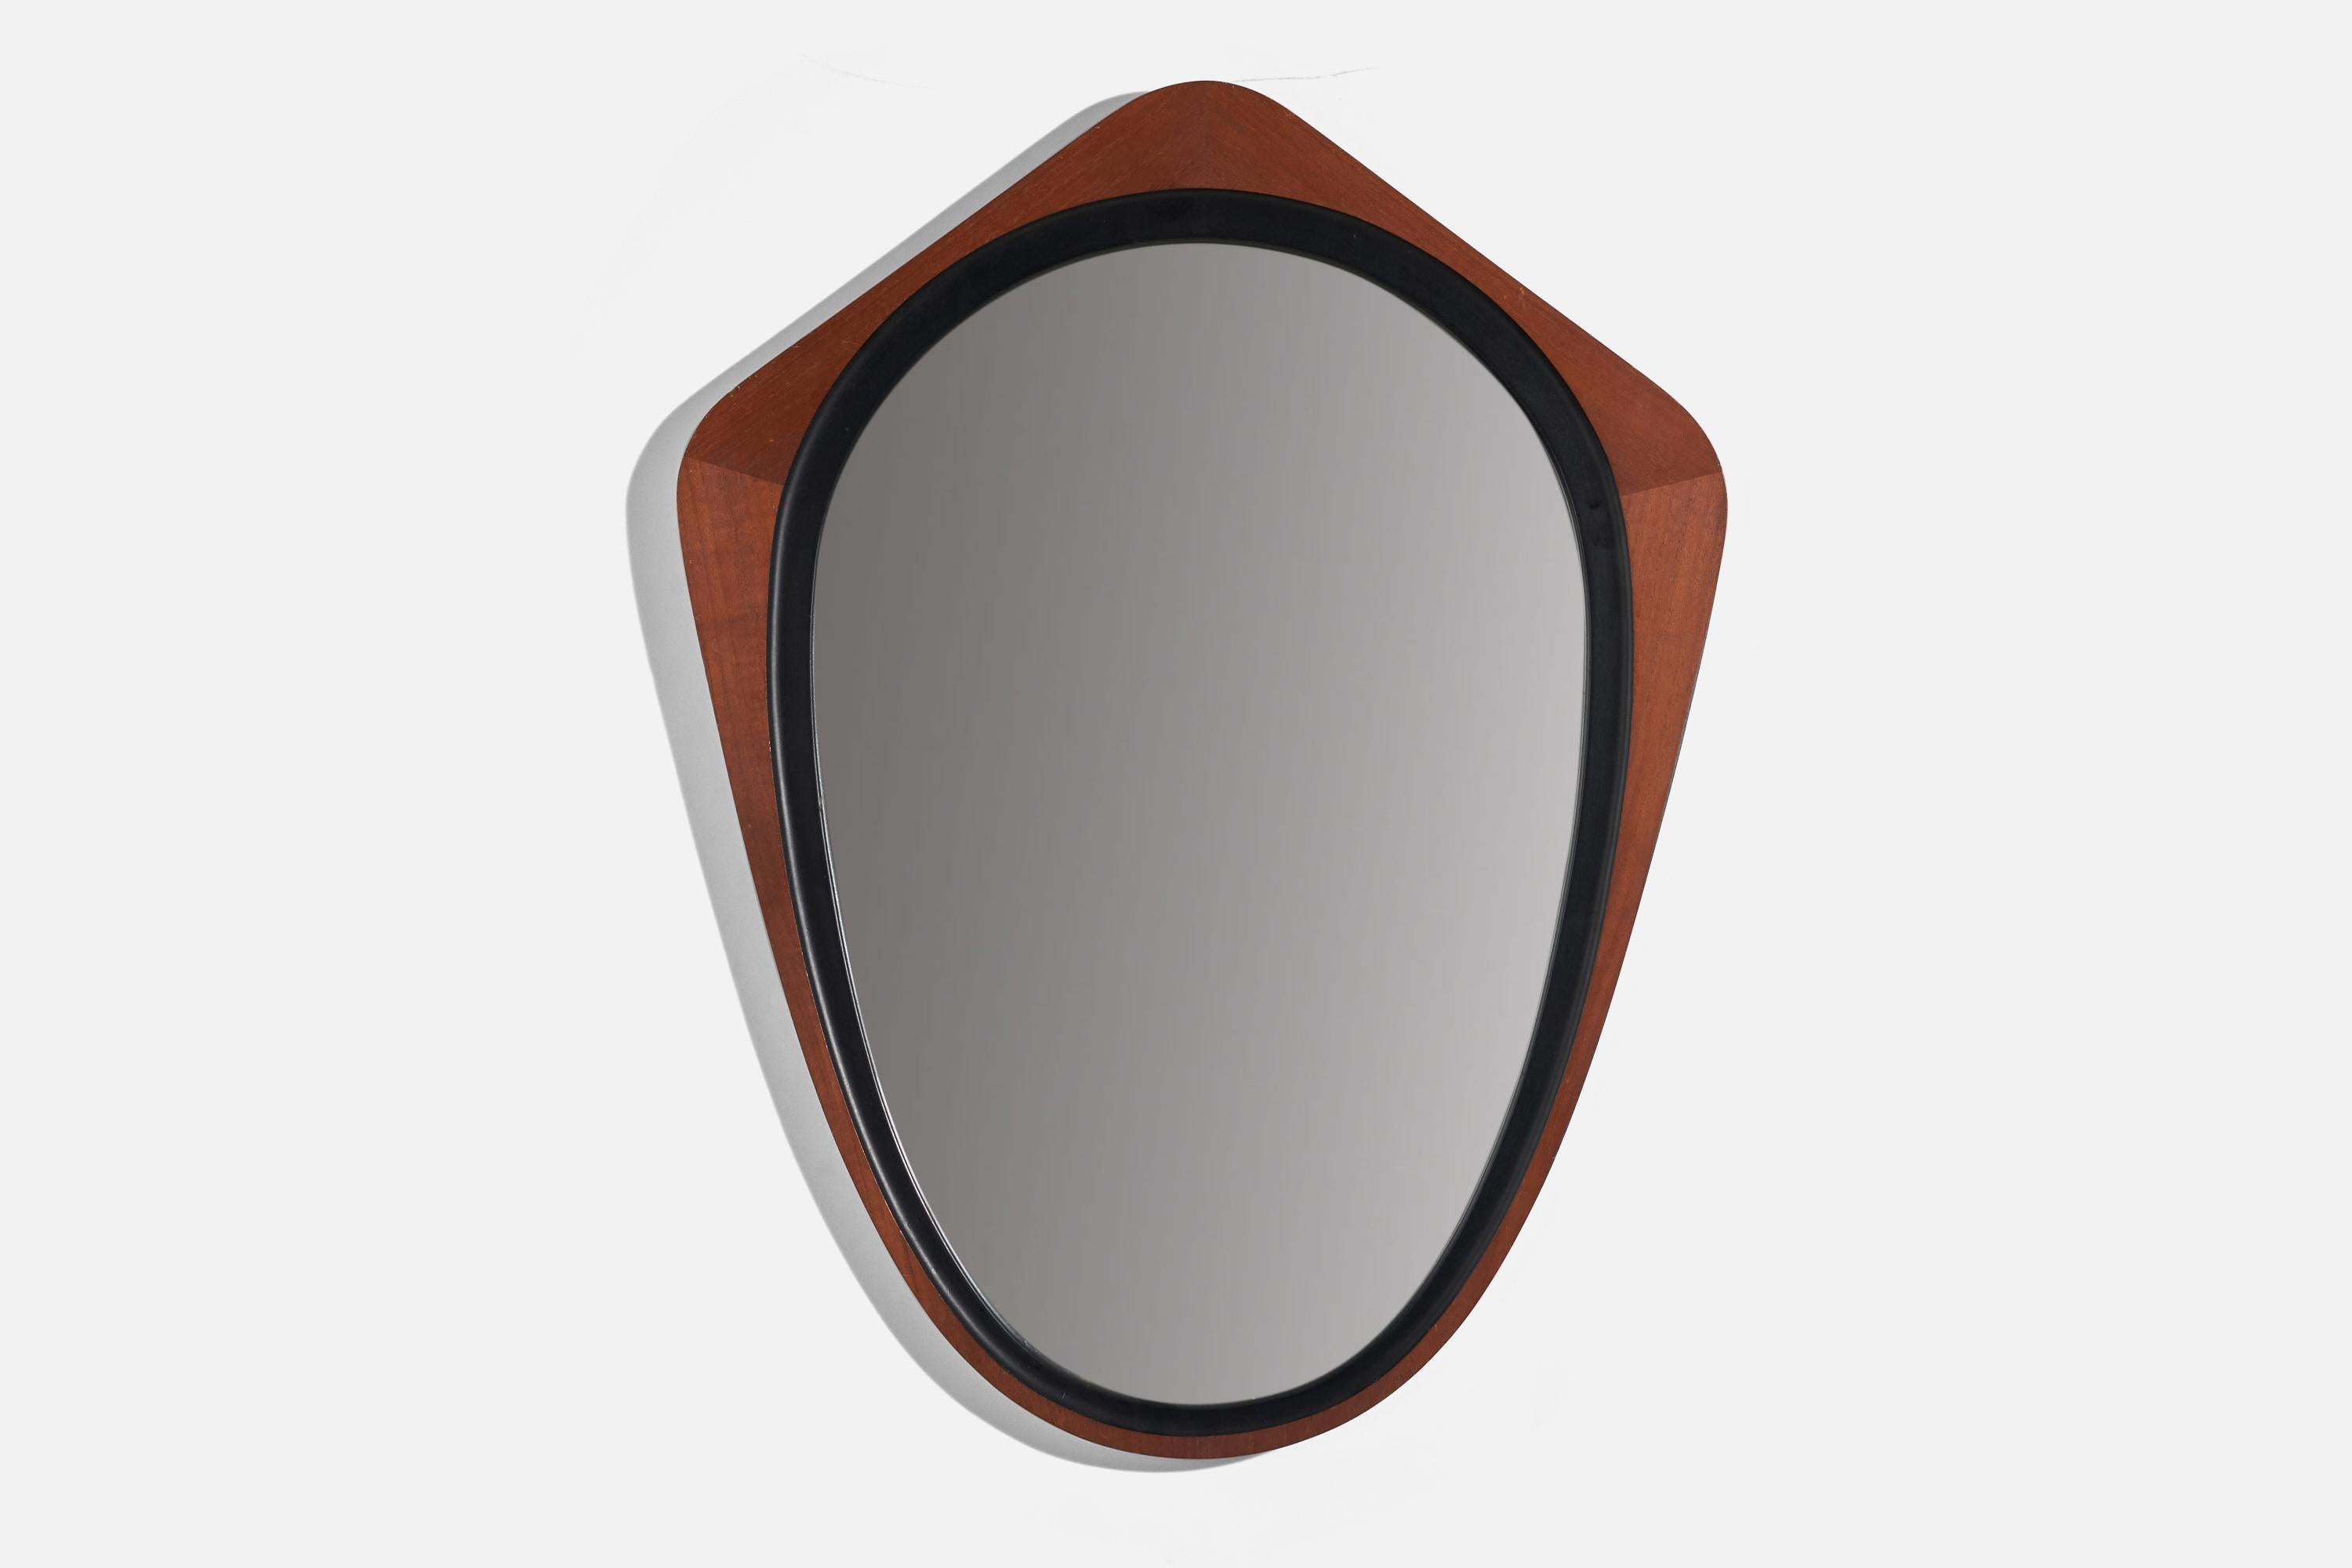 A rosewood and black-painted wood wall mirror designed by Glas & Trä and produced by Hovmantorp, Sweden, 1950s.